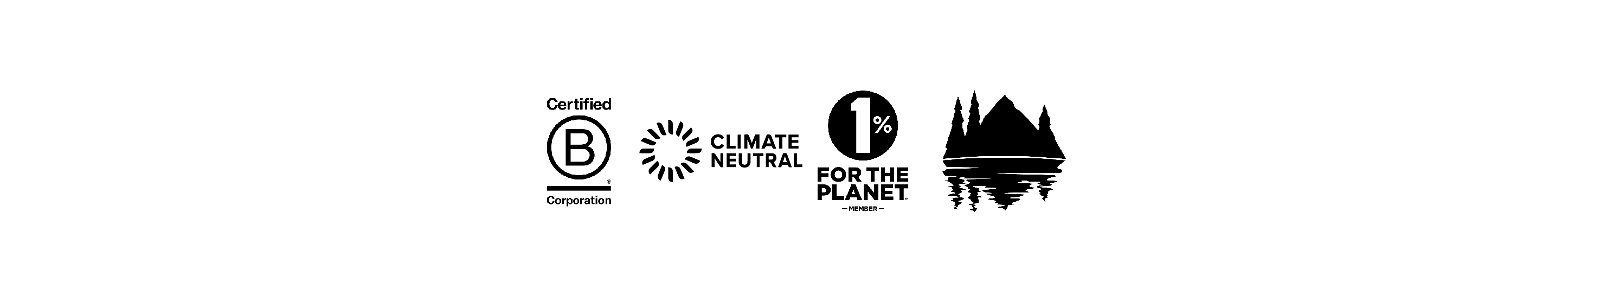 Certified B Corporation, Climate Neutral, 1% for the planet, The Conservation Alliance